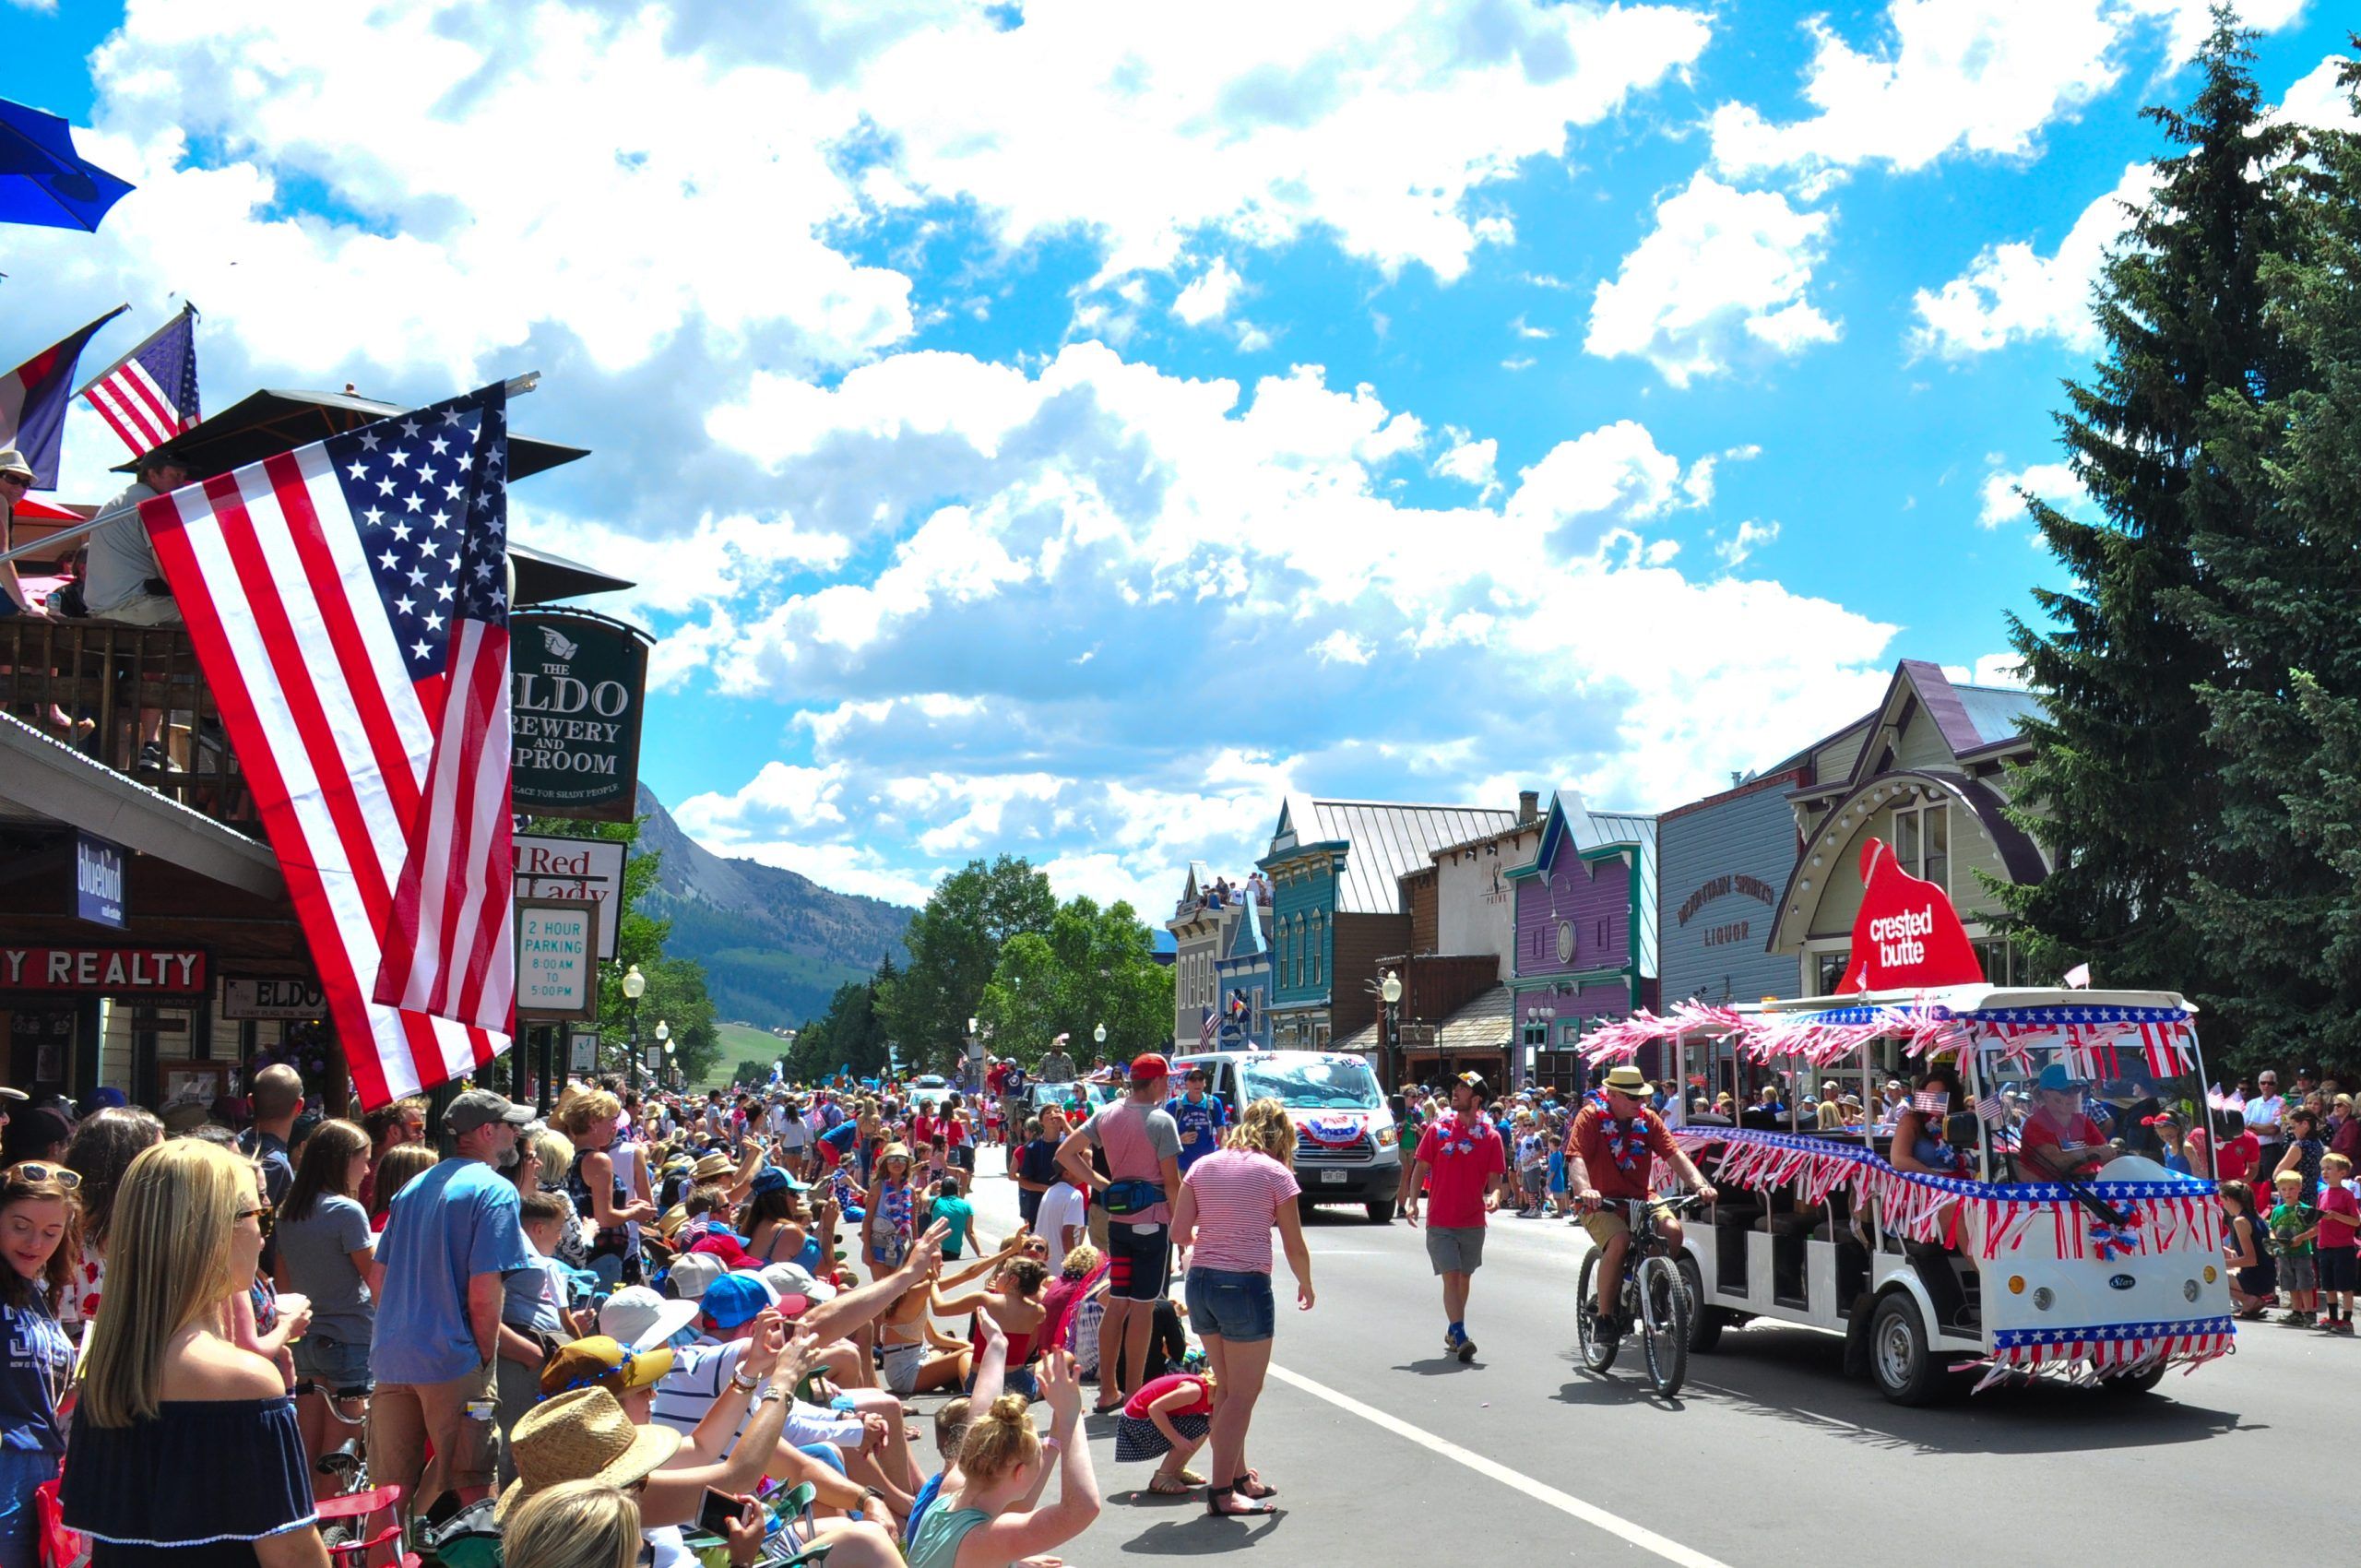 The Fourth of July parade in Crested Butte, Colorado.